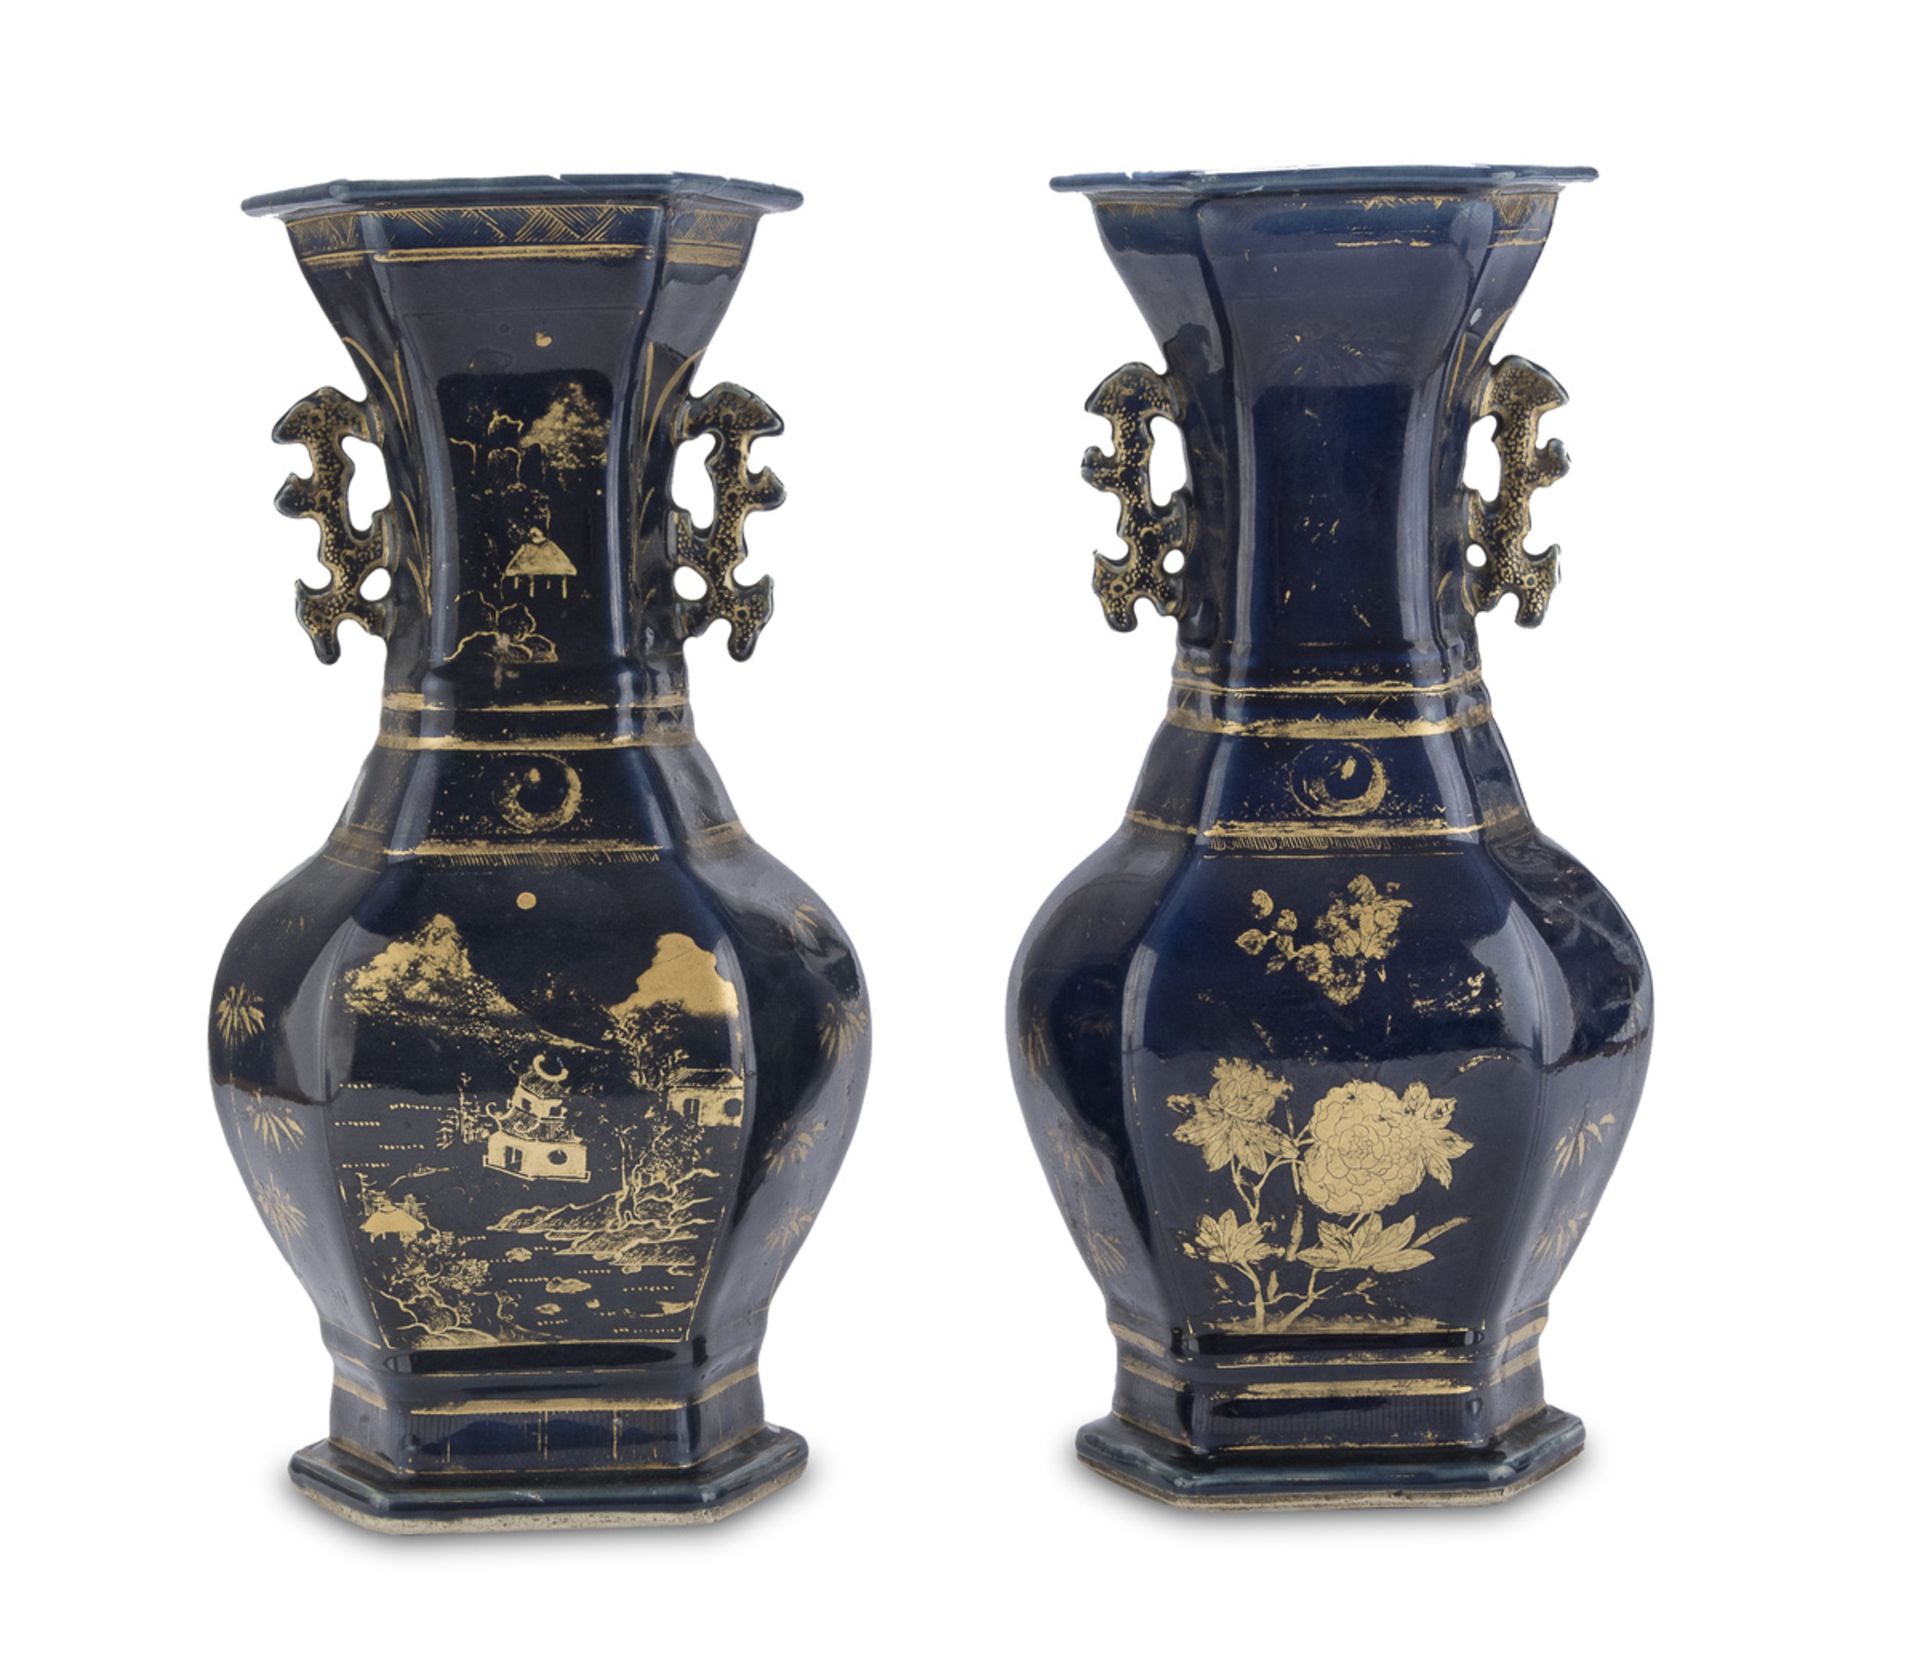 A PAIR OF BLUE AND GOLD PORCELAIN VASES CHINA LATE 17TH EARLY 18TH CENTURY